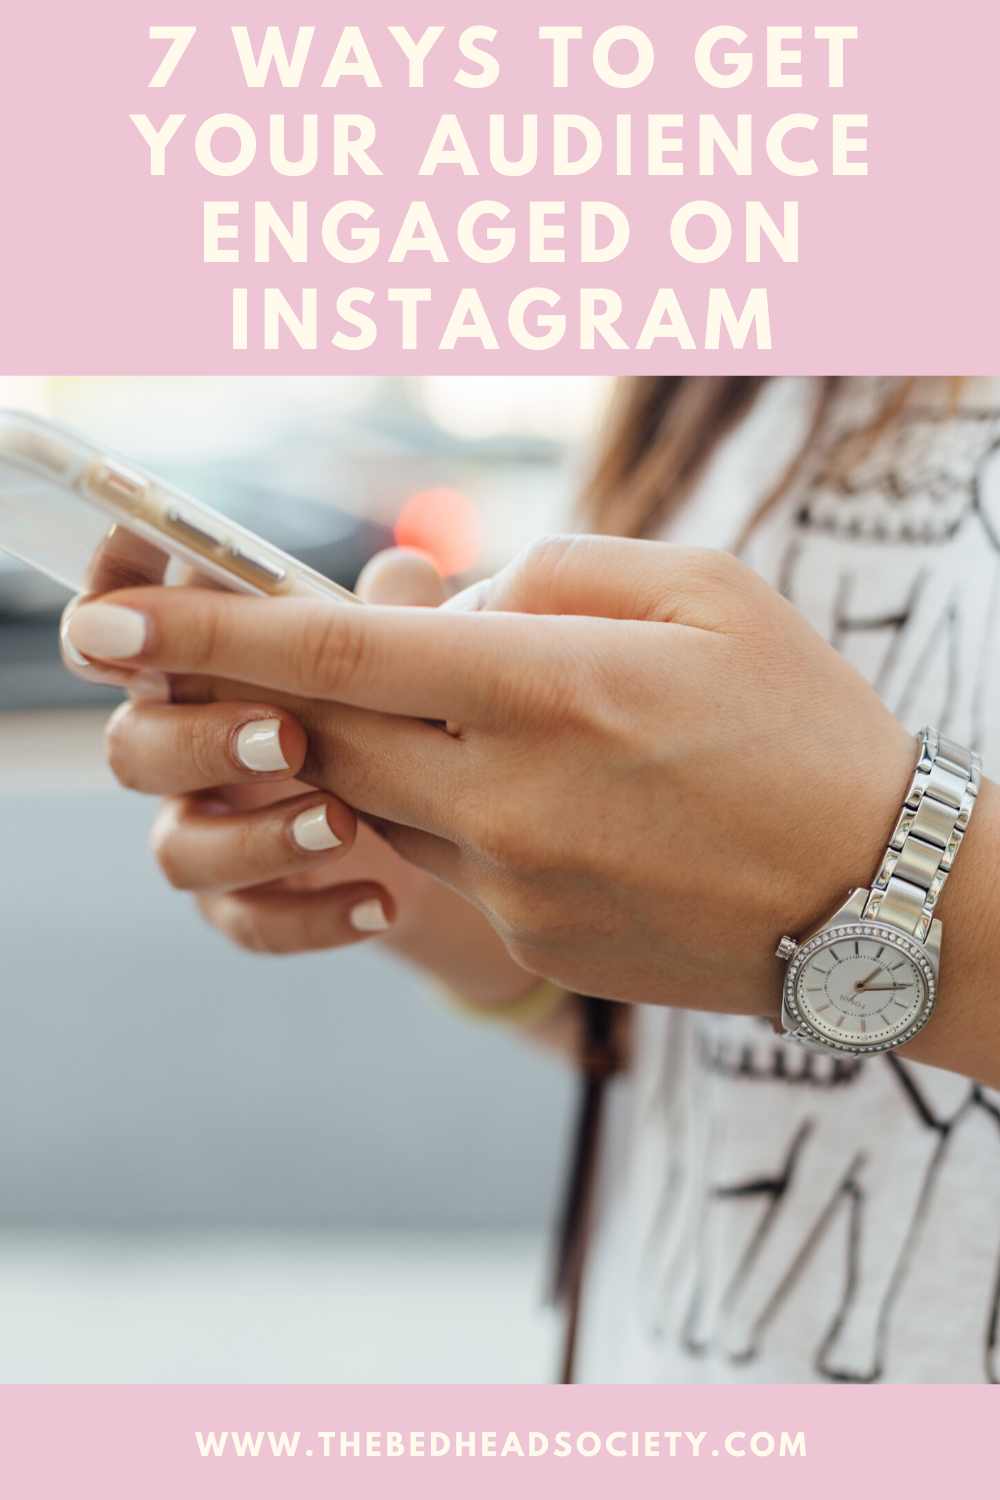 7 WAYS TO GET YOUR AUDIENCE ENGAGED ON INSTAGRAM - PIN